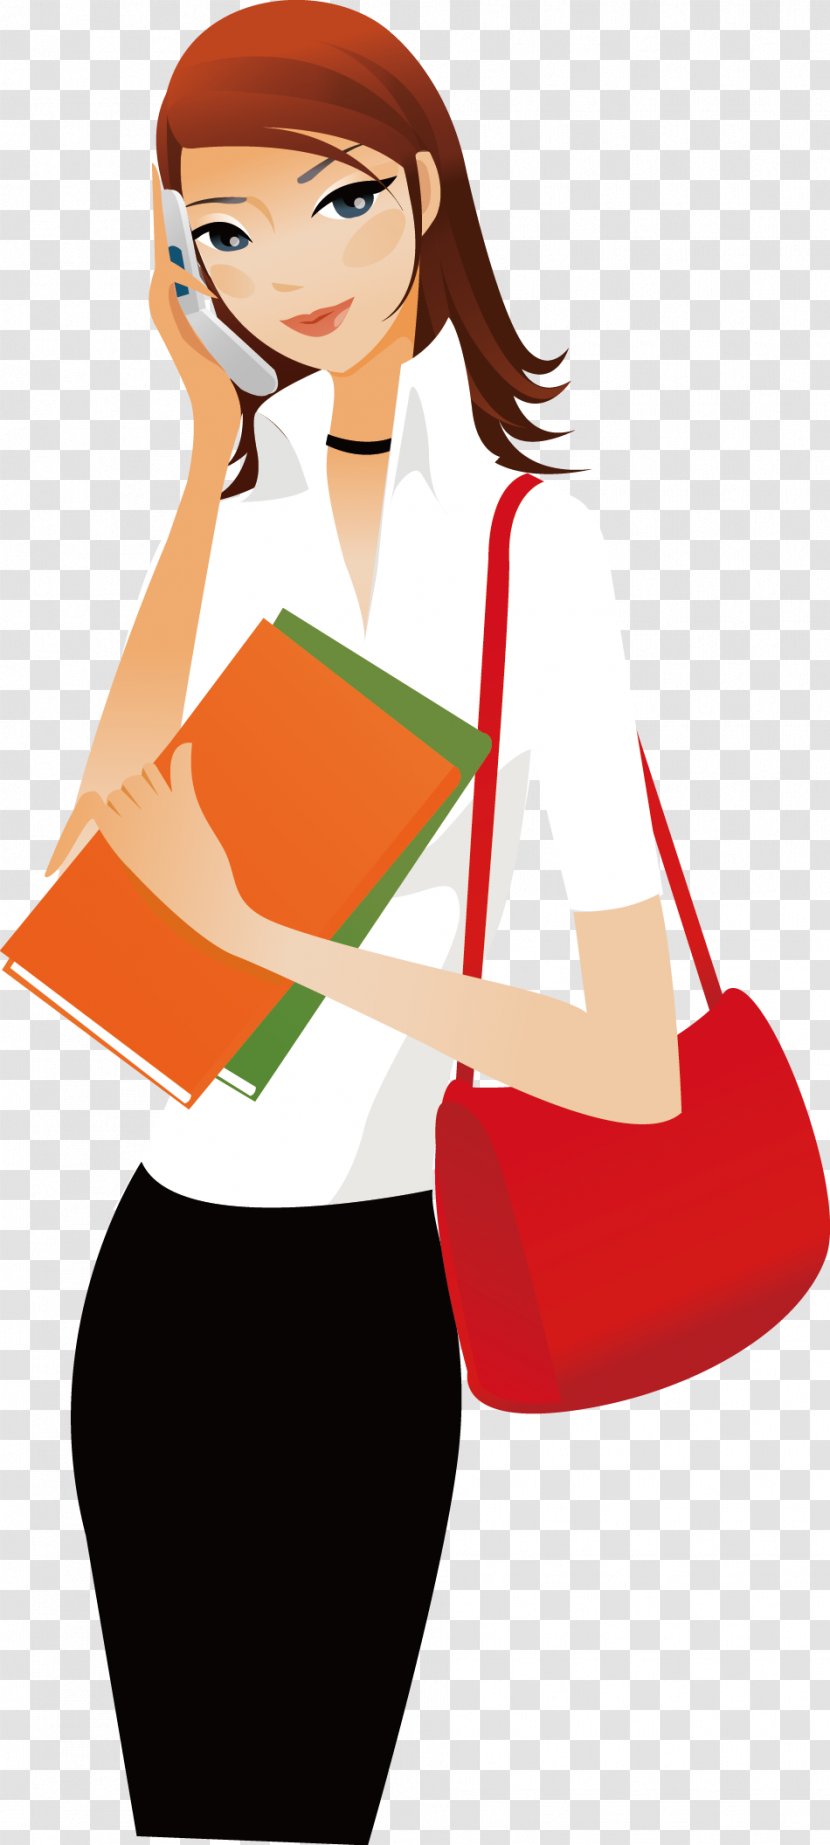 Stock Illustration Royalty-free Clip Art - Cartoon - Women In The Workplace Fashion Redhead Transparent PNG